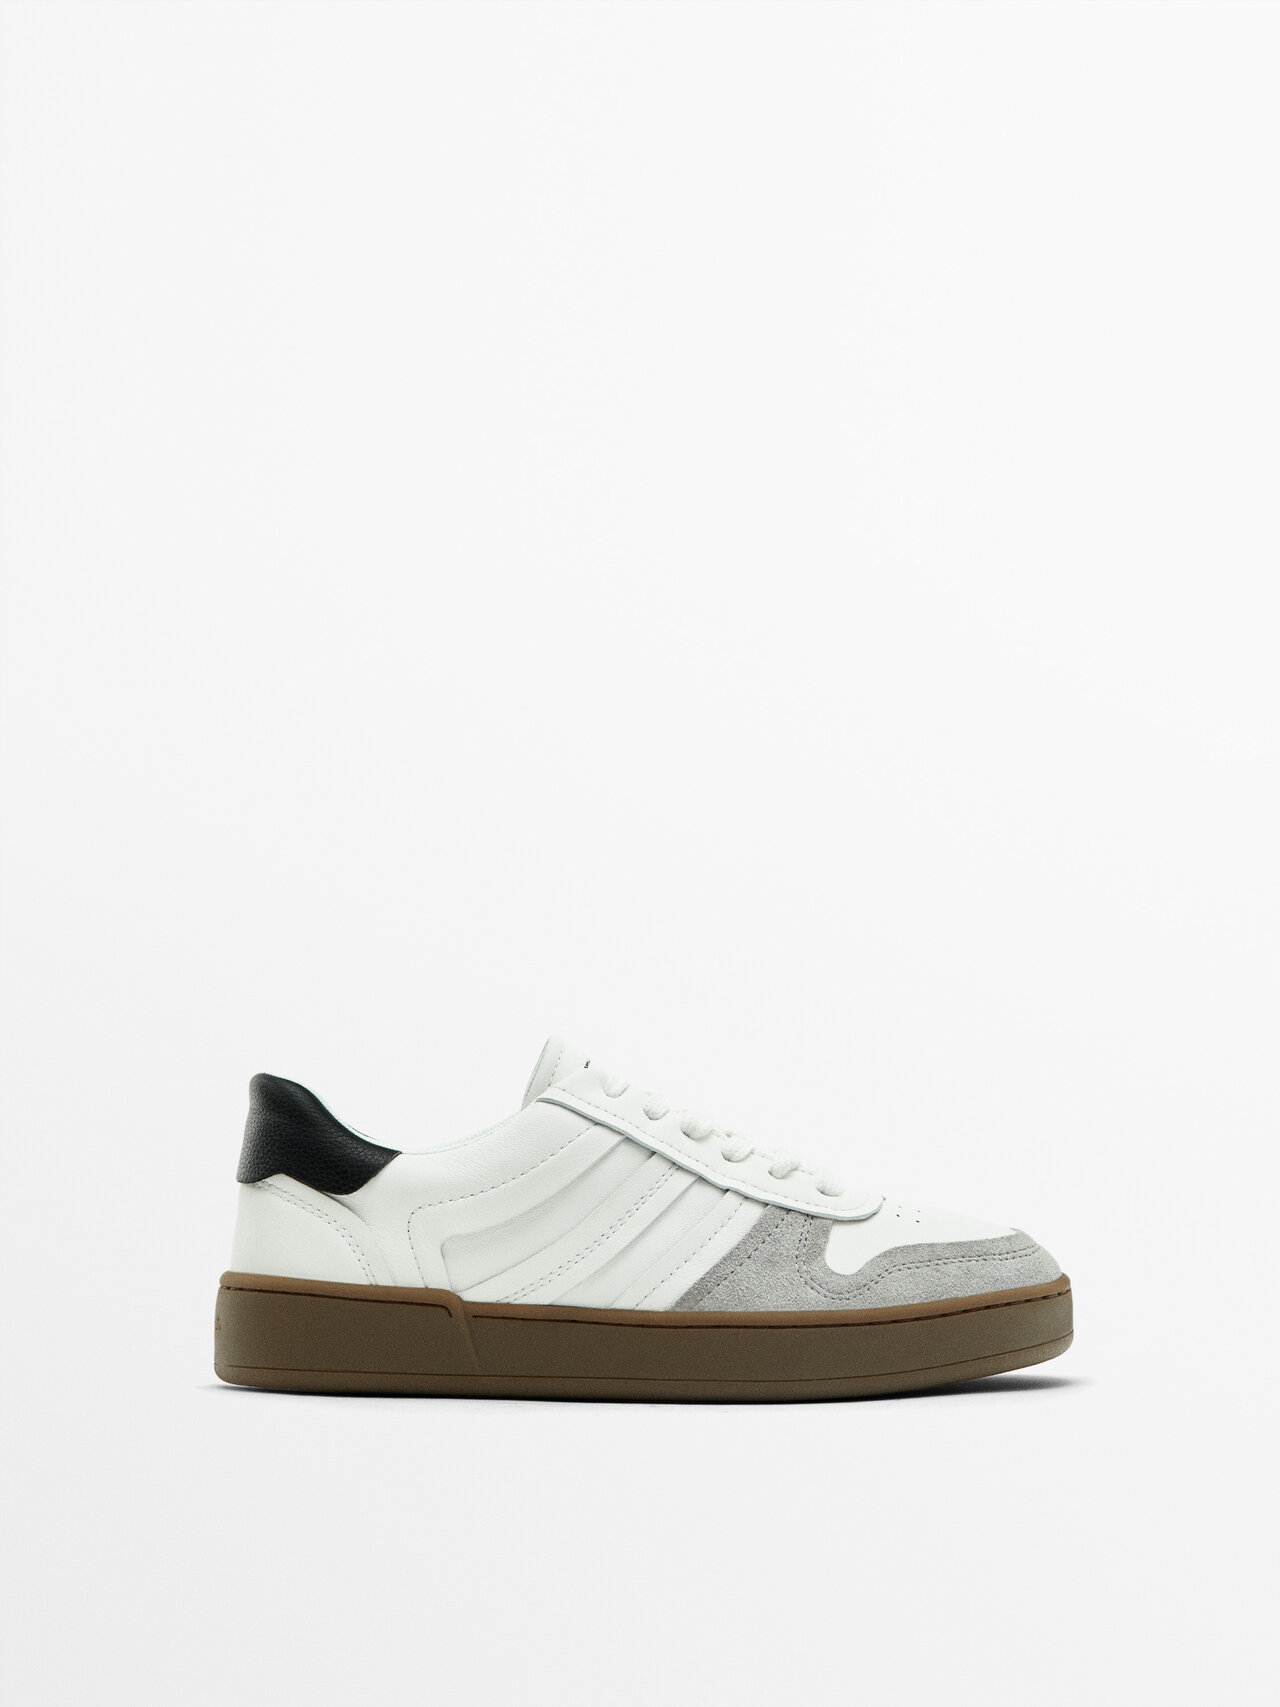 Massimo Dutti Trainers With Contrast Pieces